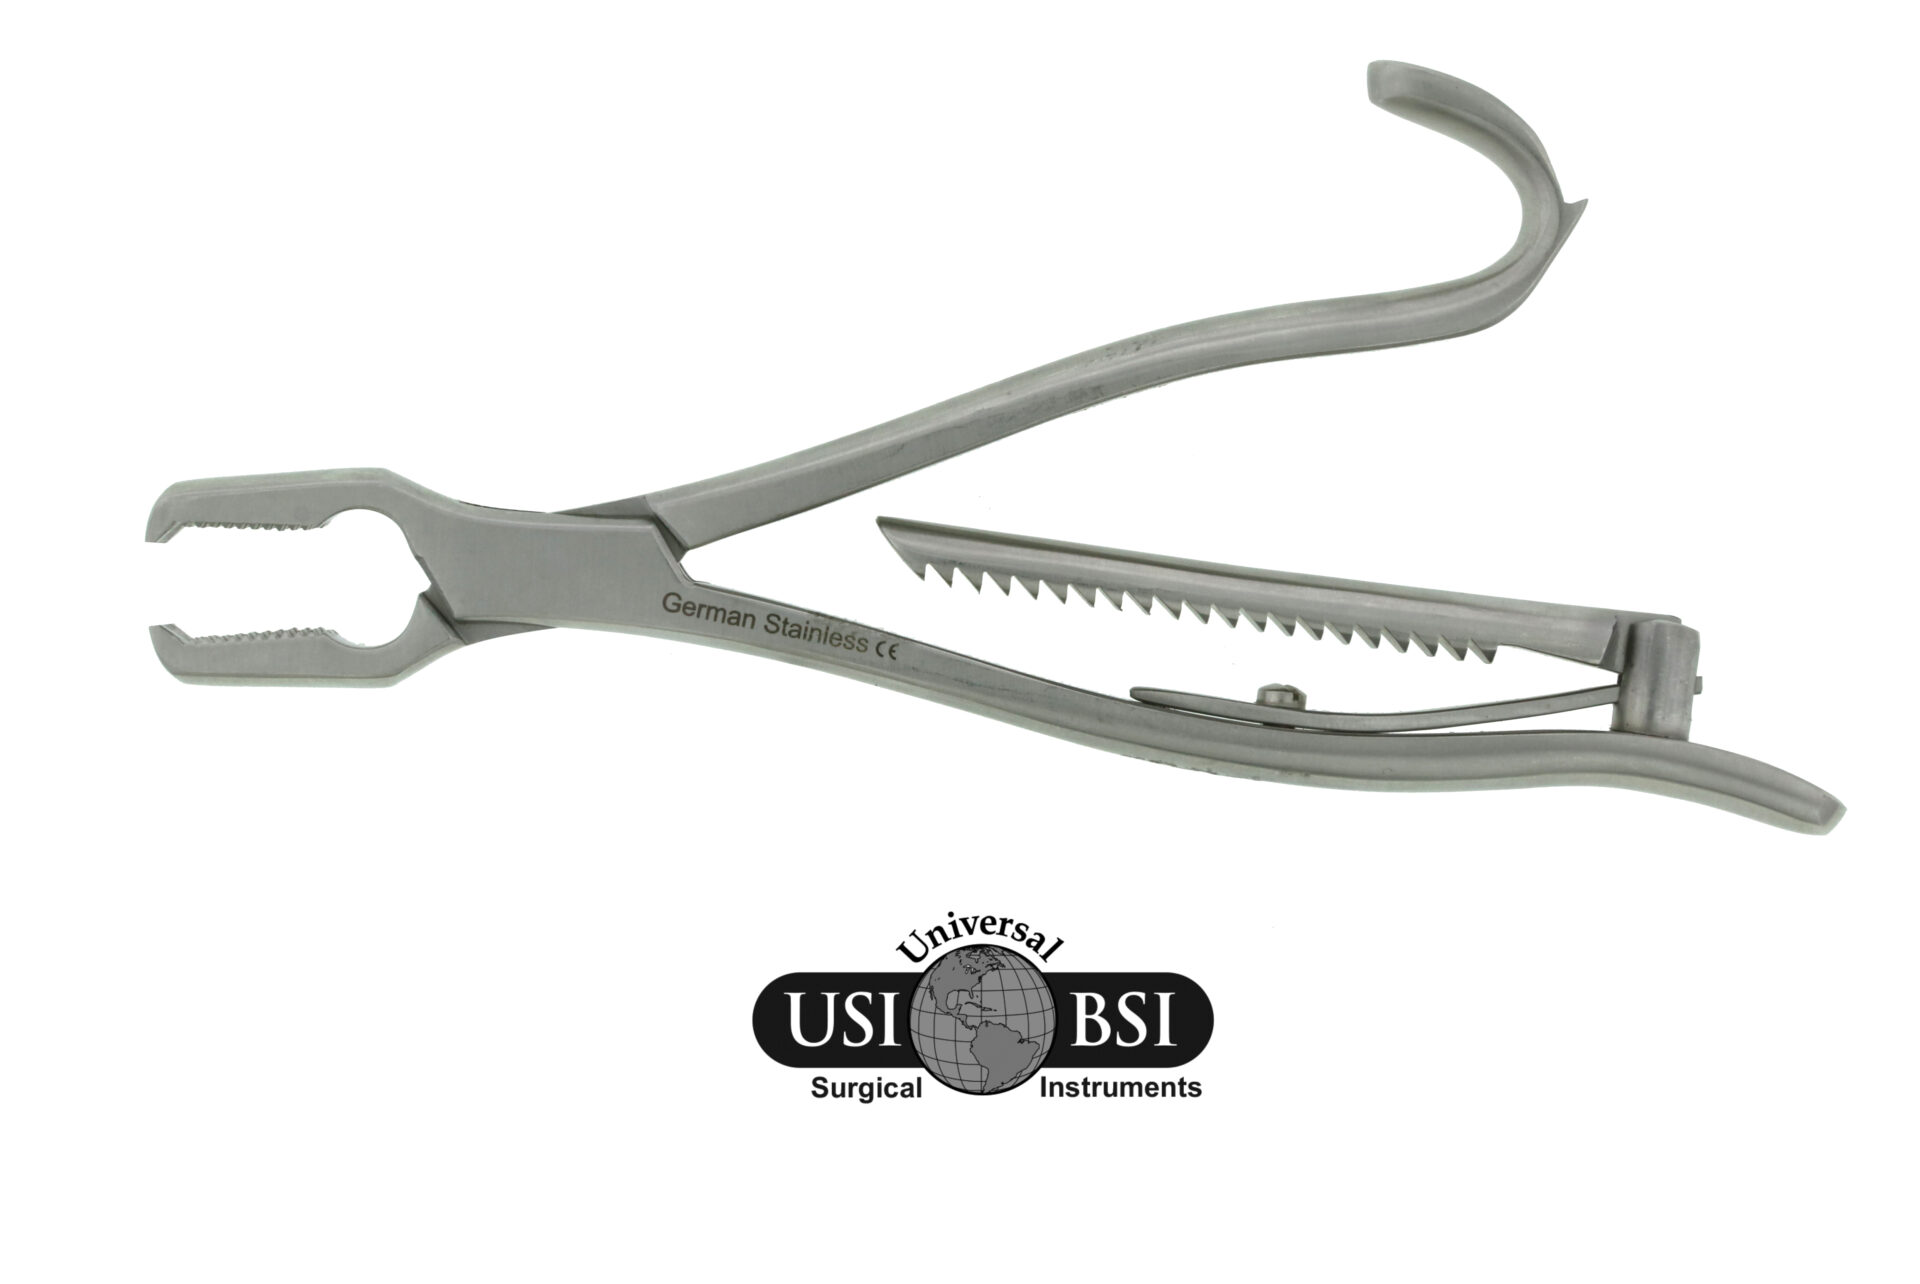 A pair of scissors with a saw blade on the handle.